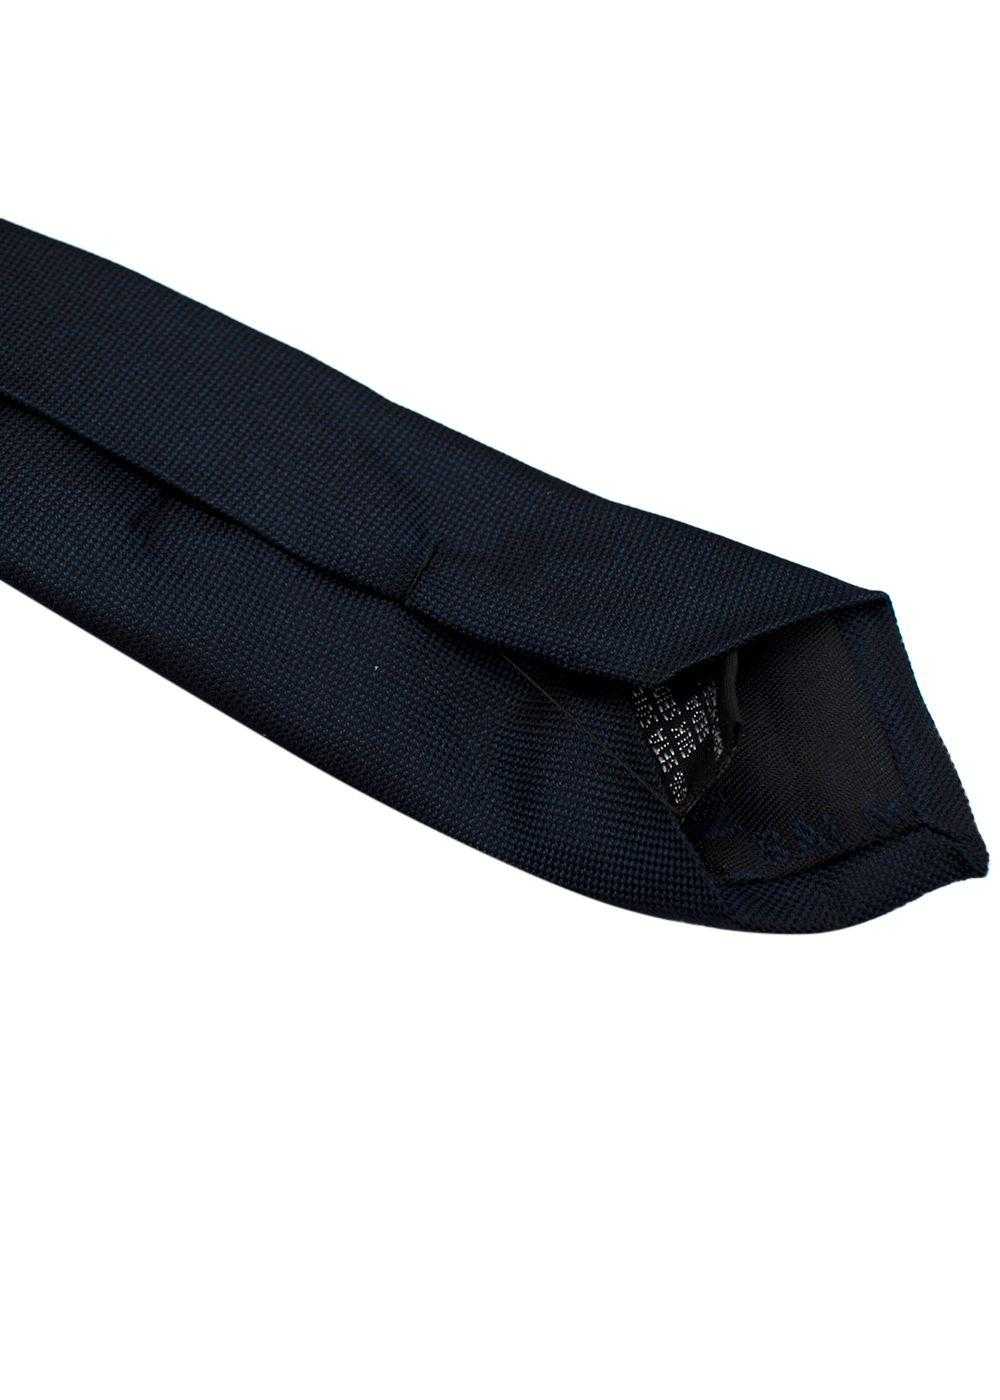 Managed by hewi Balmain Navy Woven Silk Tie - image 2